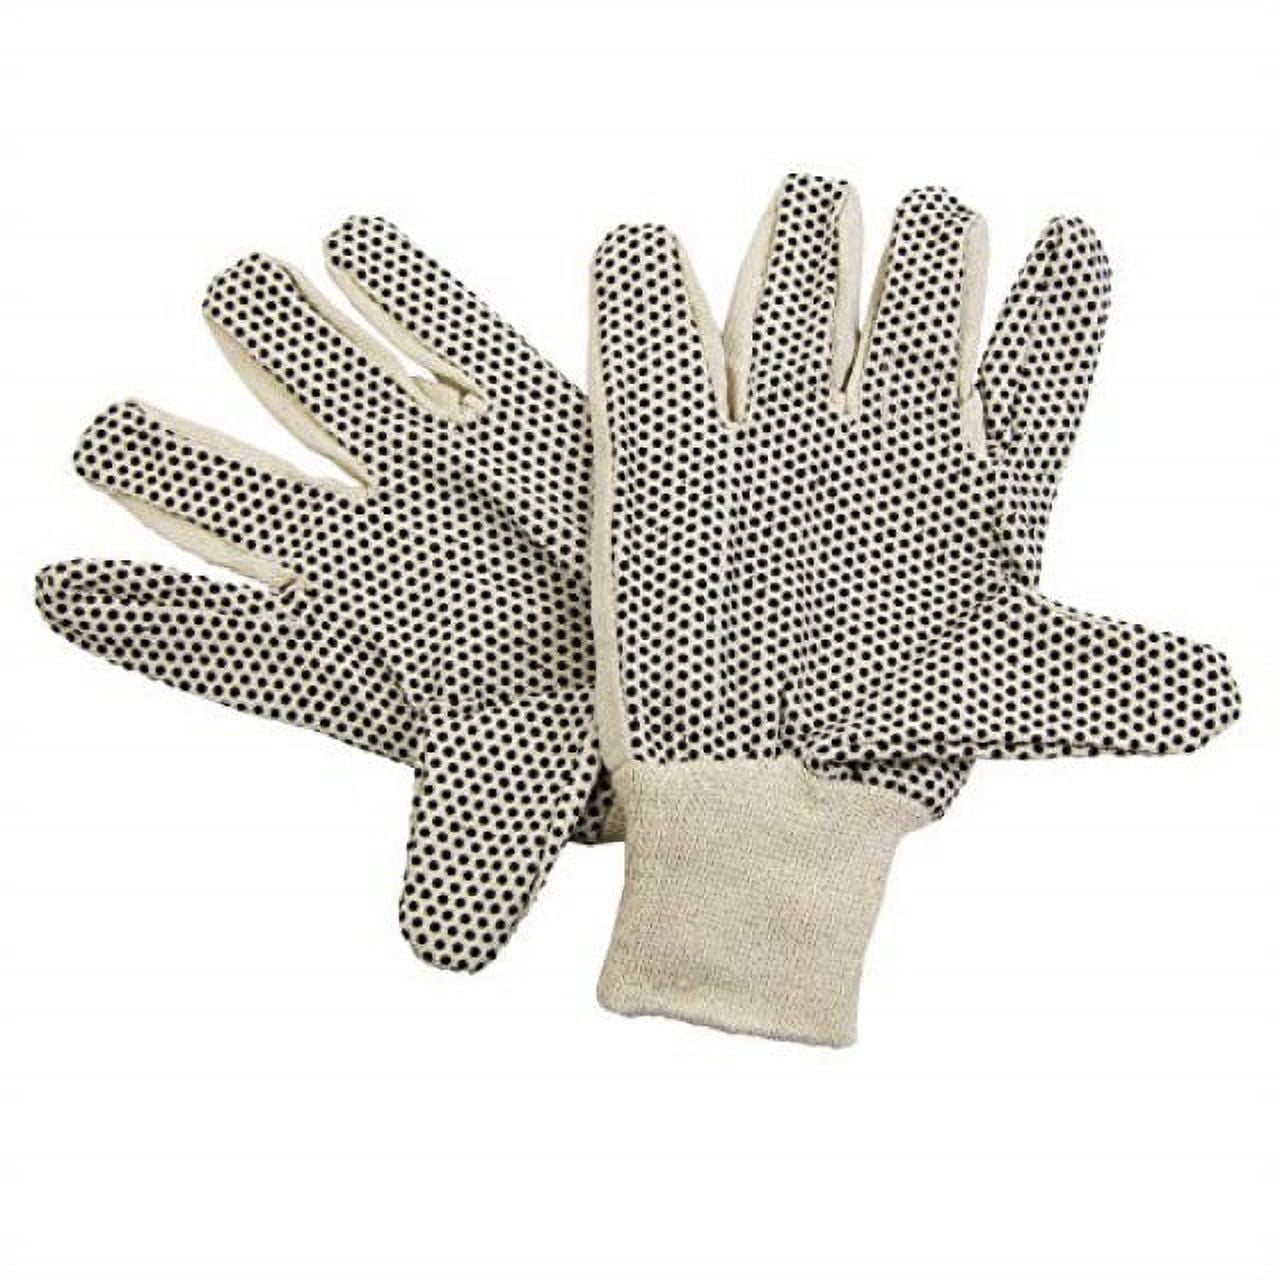 Hyper Tough 3 Pack, Nitrile Grip Gloves, Gray, Latex Free, Large